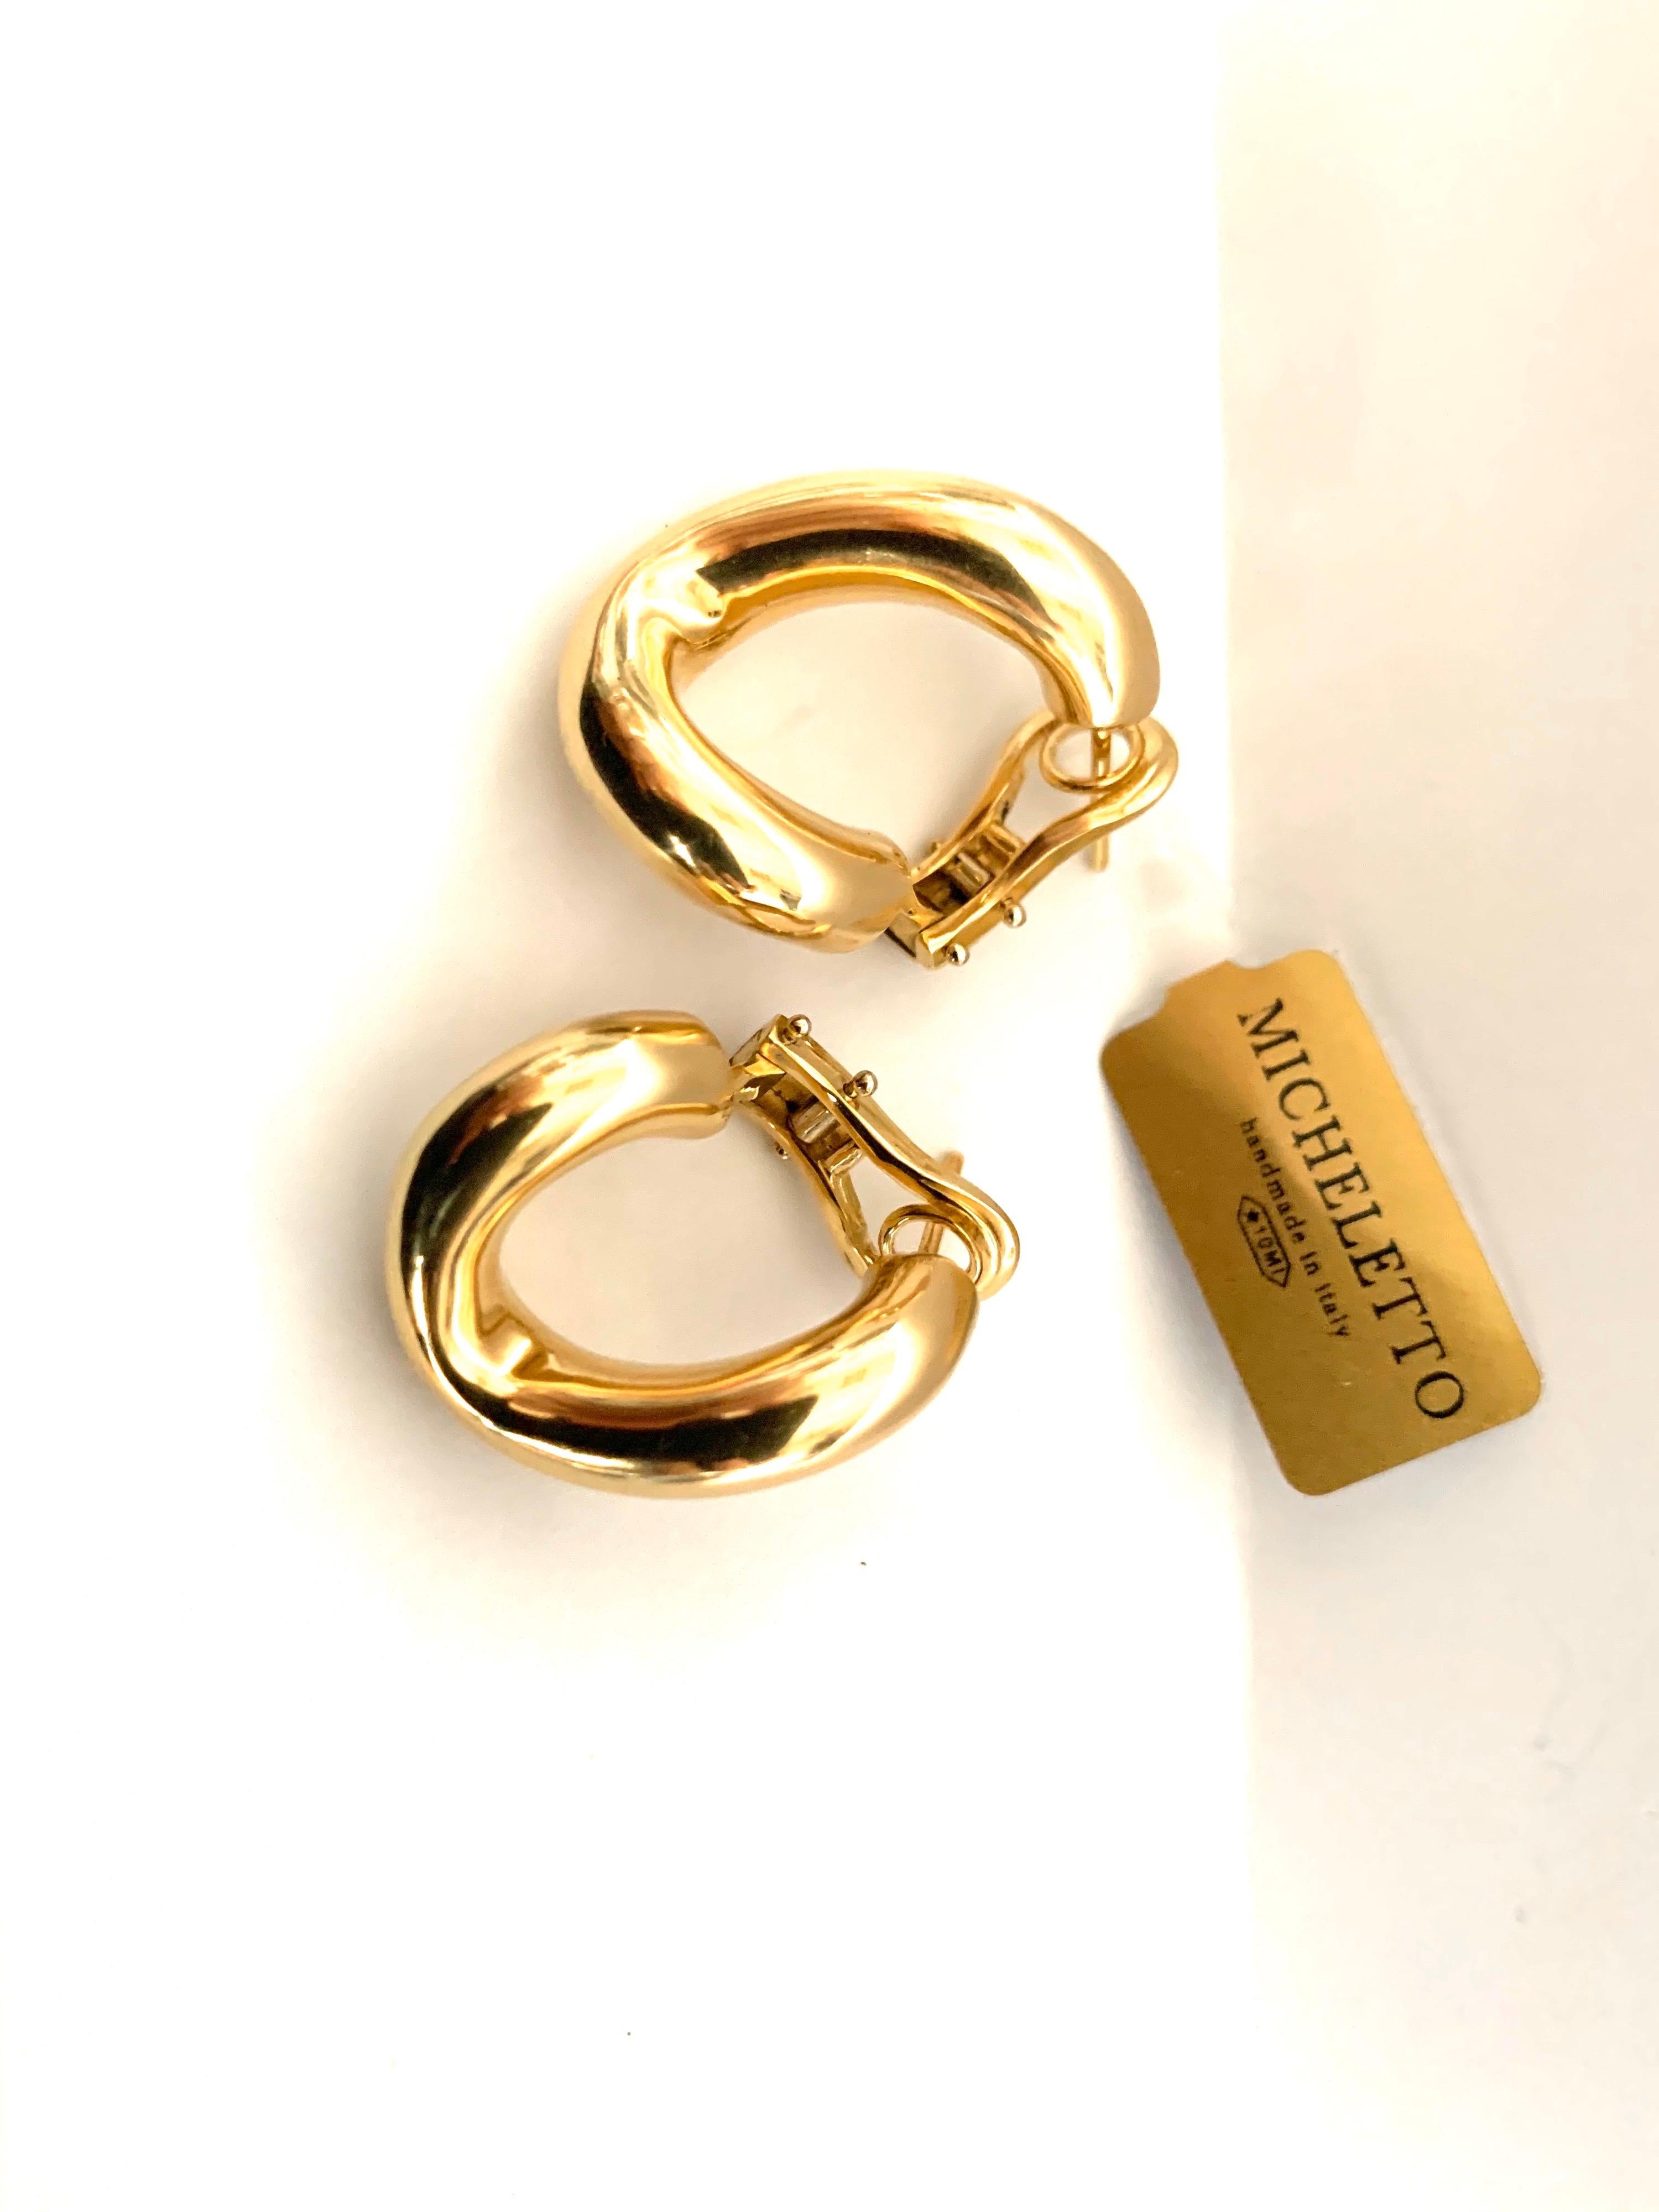 Classic groumette pair of earrings in 18 kt yellow gold 
This is the iconic collection in Micheletto.

the total weight of the gold is 9.6

STAMP: 10 MI ITALY 750

The full set is available.
The bracelet can be locked togheter to make the necklace